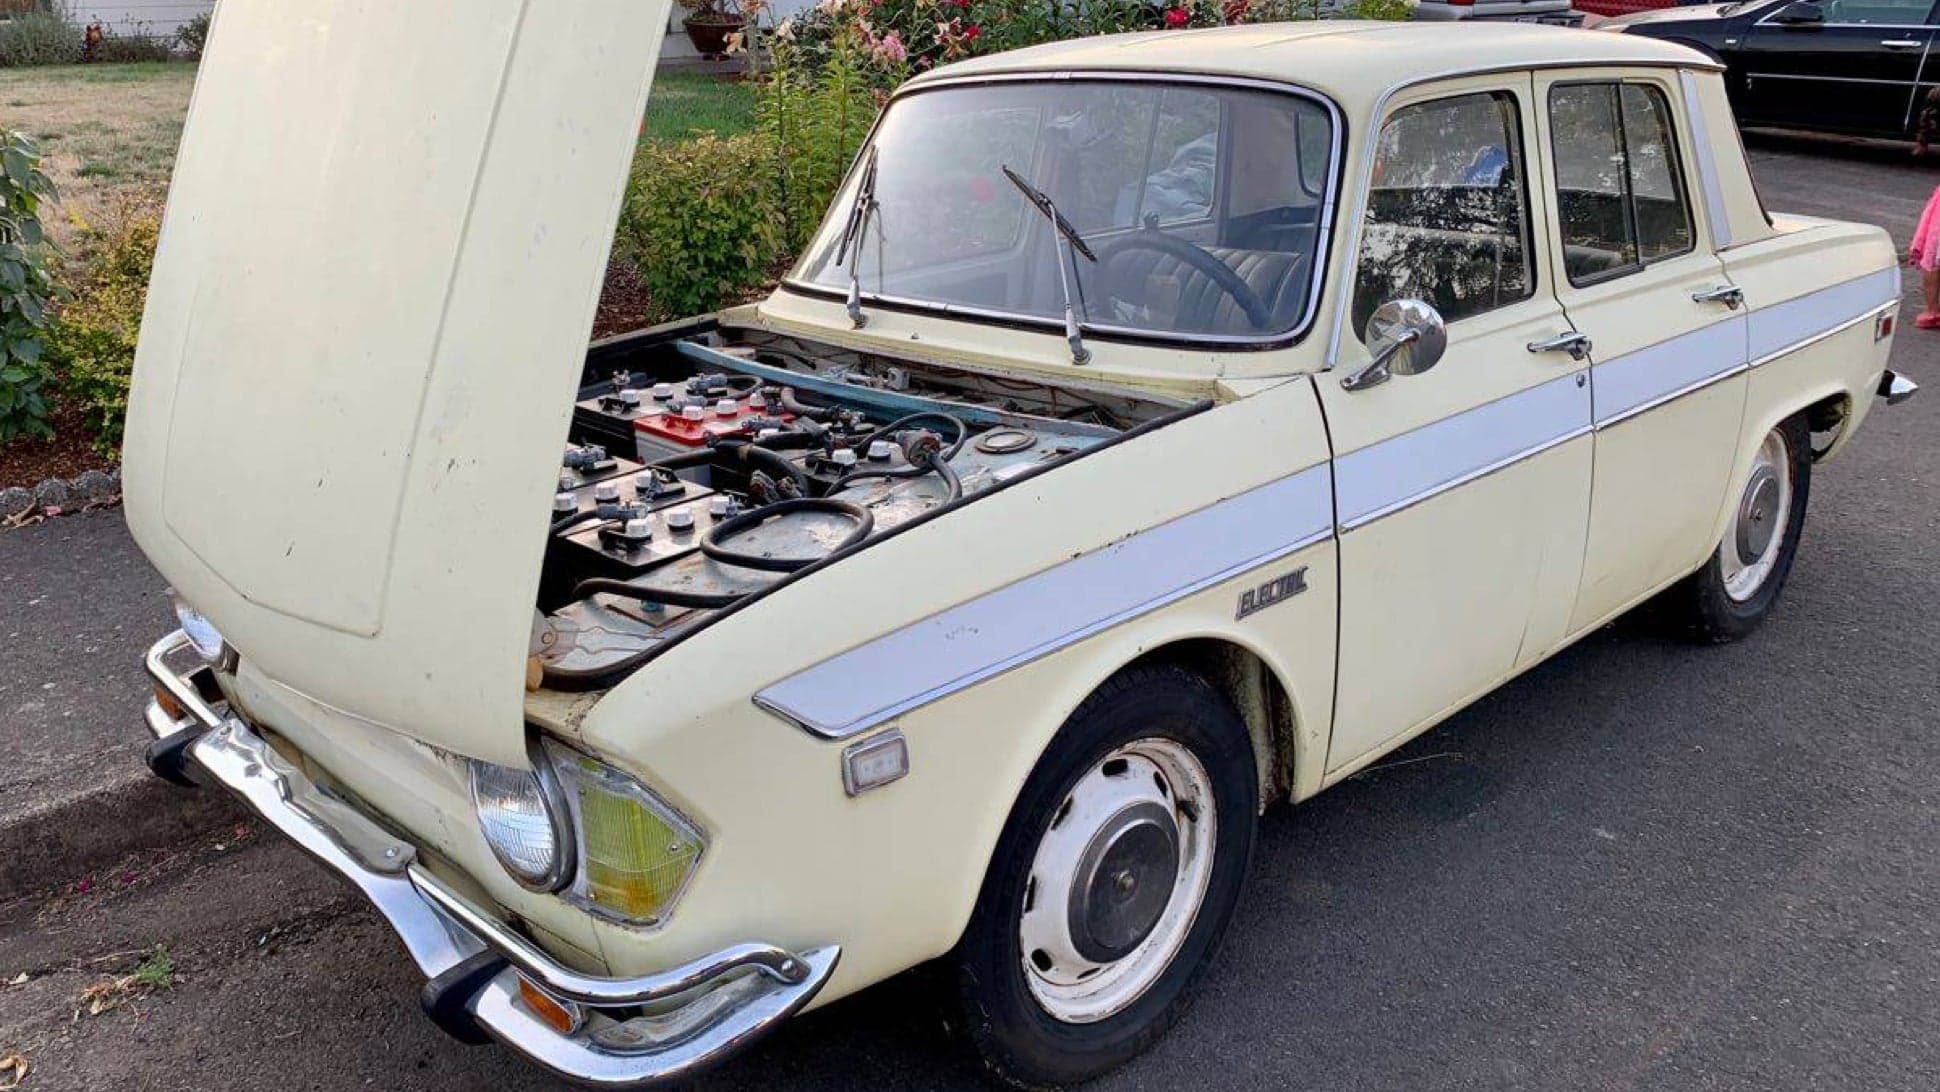 This Classic 1968 Mars II Electric Vehicle Must Ride Again (And It’s For Sale)